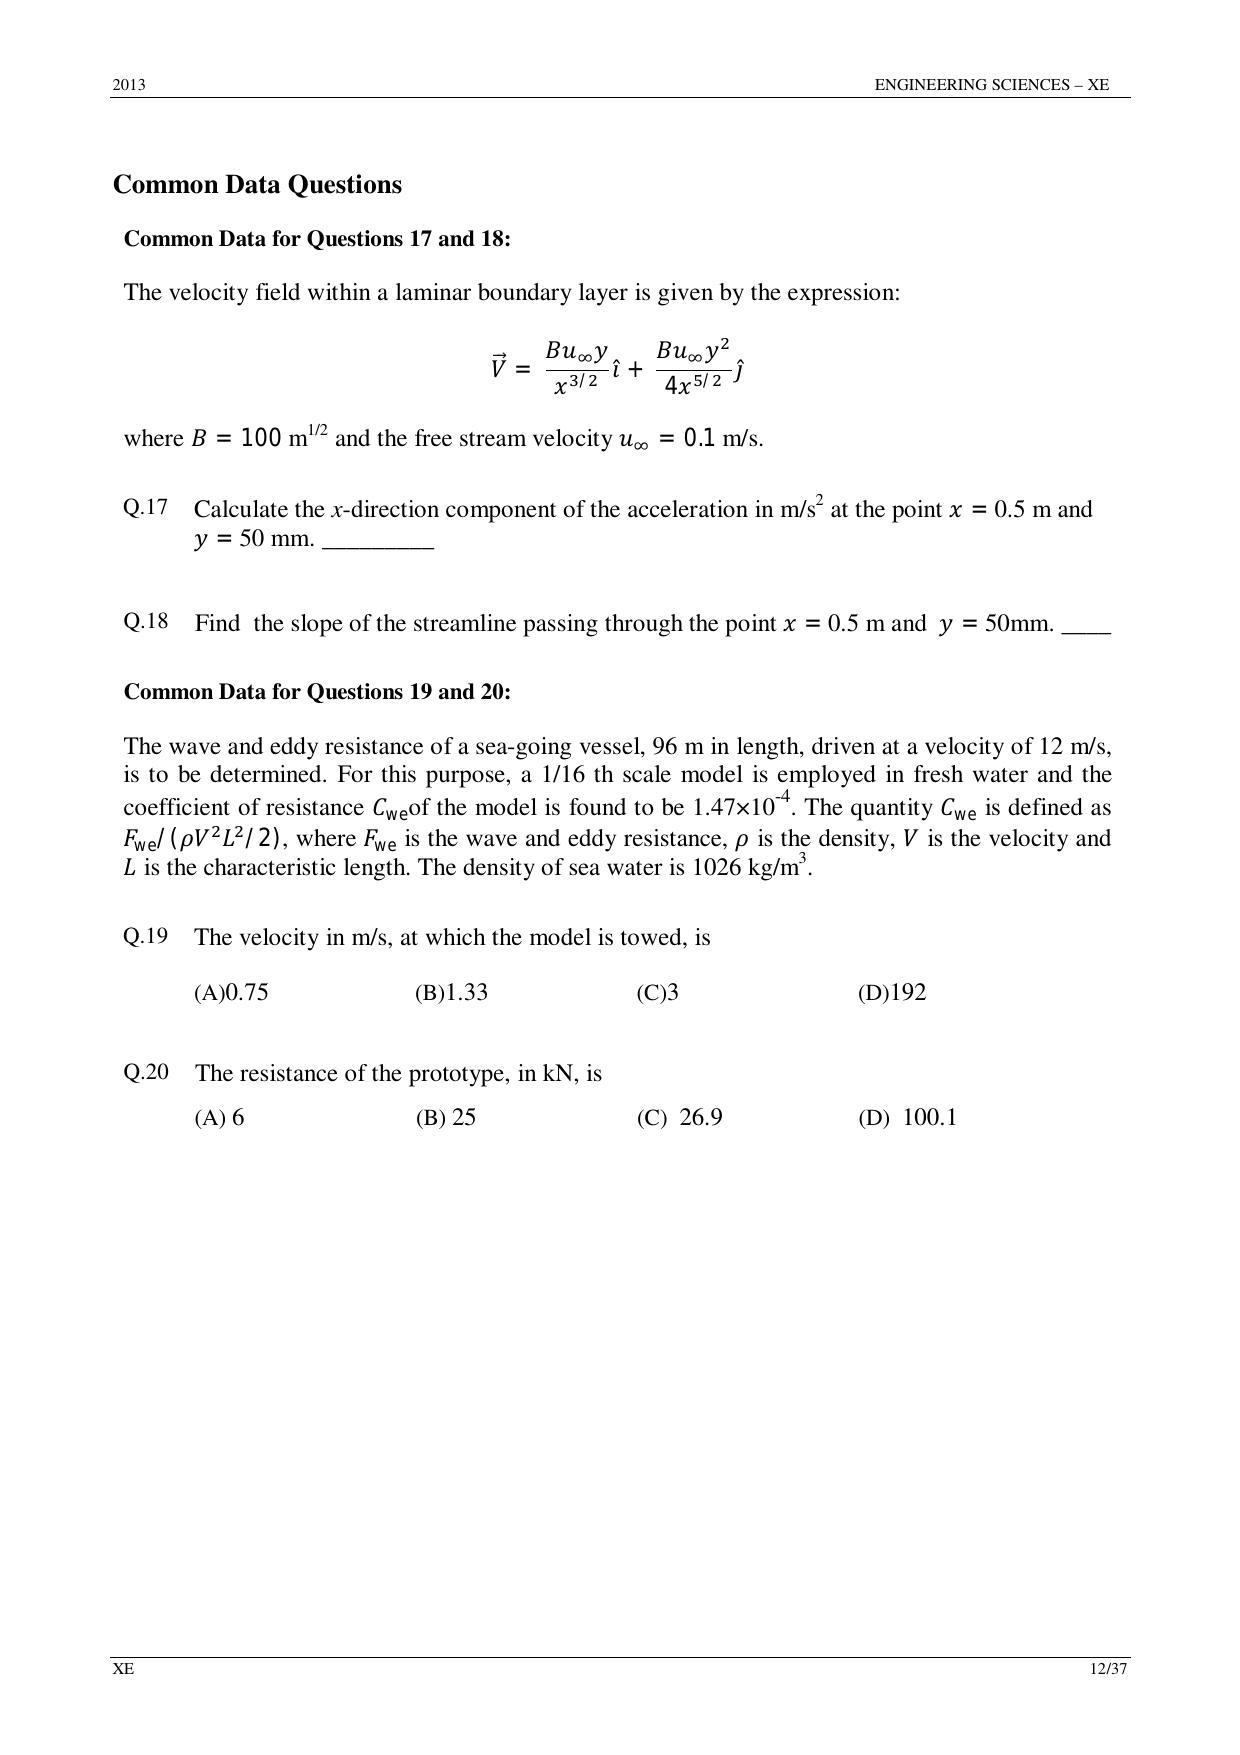 GATE 2013 Engineering Sciences (XE) Question Paper with Answer Key - Page 12